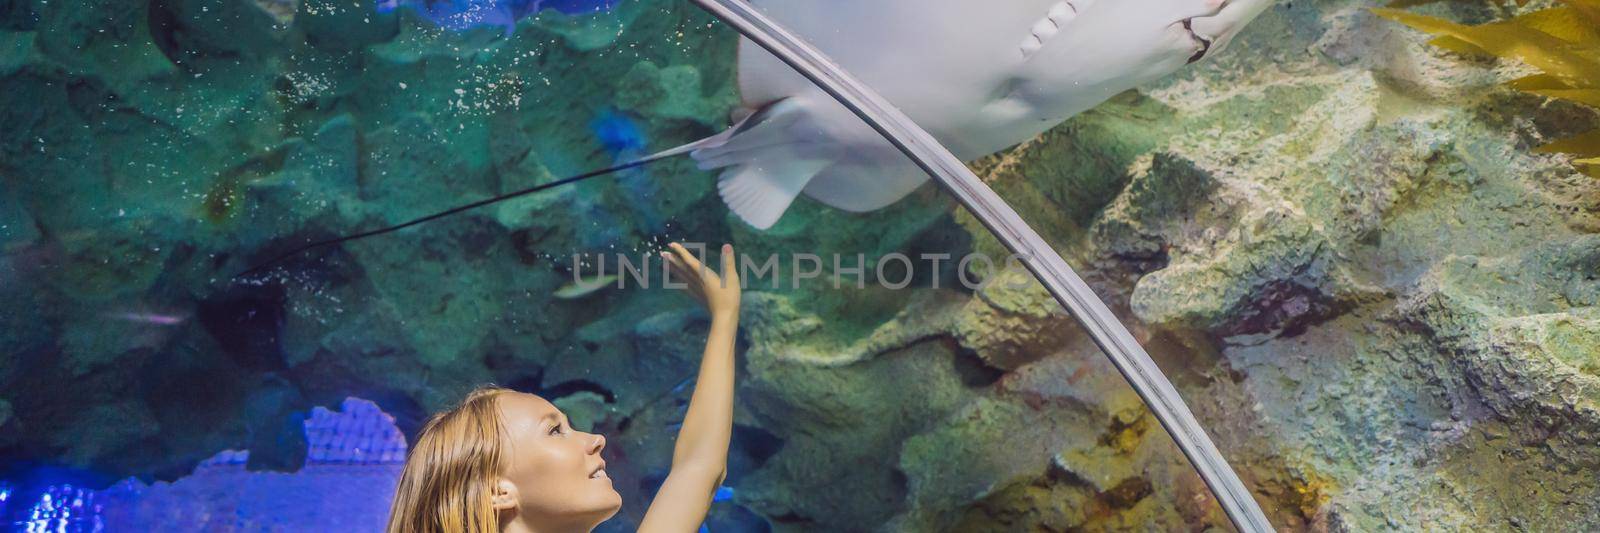 Young woman touches a stingray fish in an oceanarium tunnel BANNER, LONG FORMAT by galitskaya